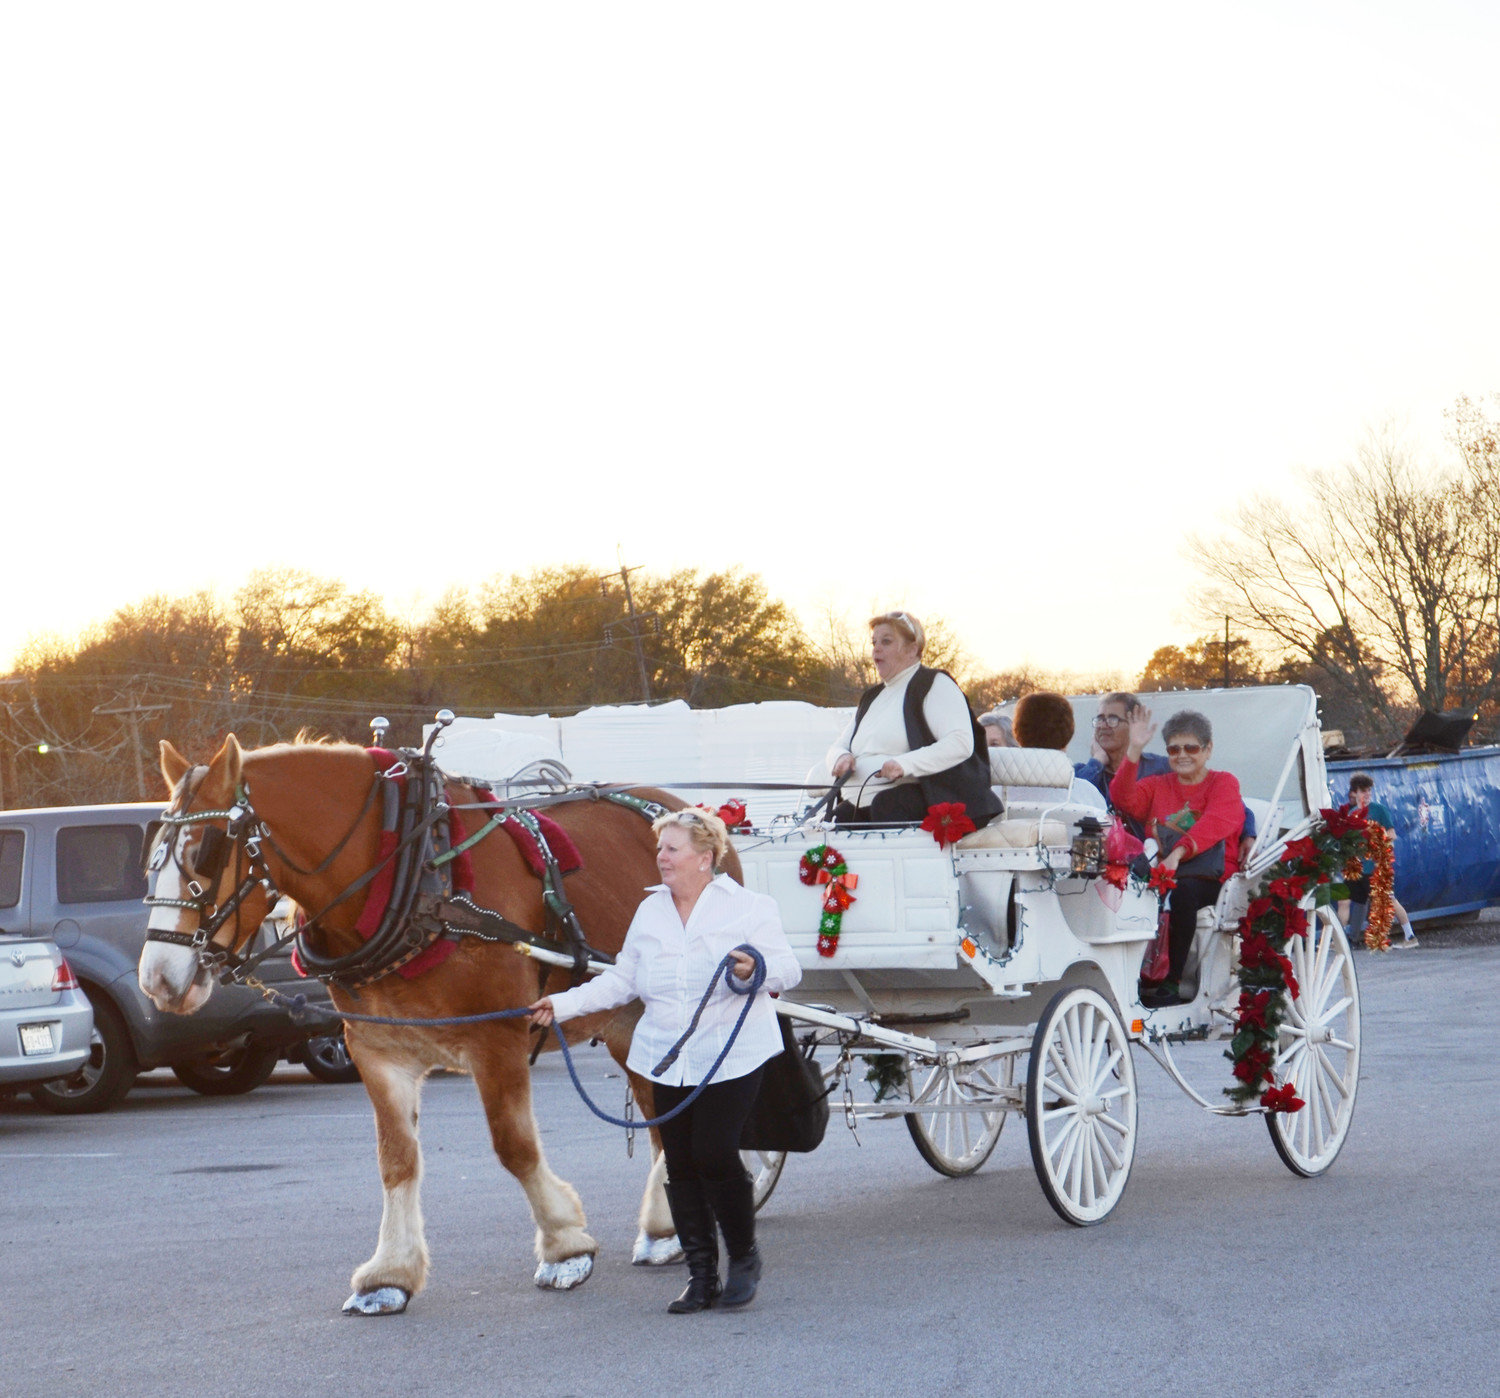 Free horse-drawn carriage rides were offered throughout the day Saturday. The rides were sponsored by the Mineola Landmark Commission.  (Monitor photo by Hank Murphy)